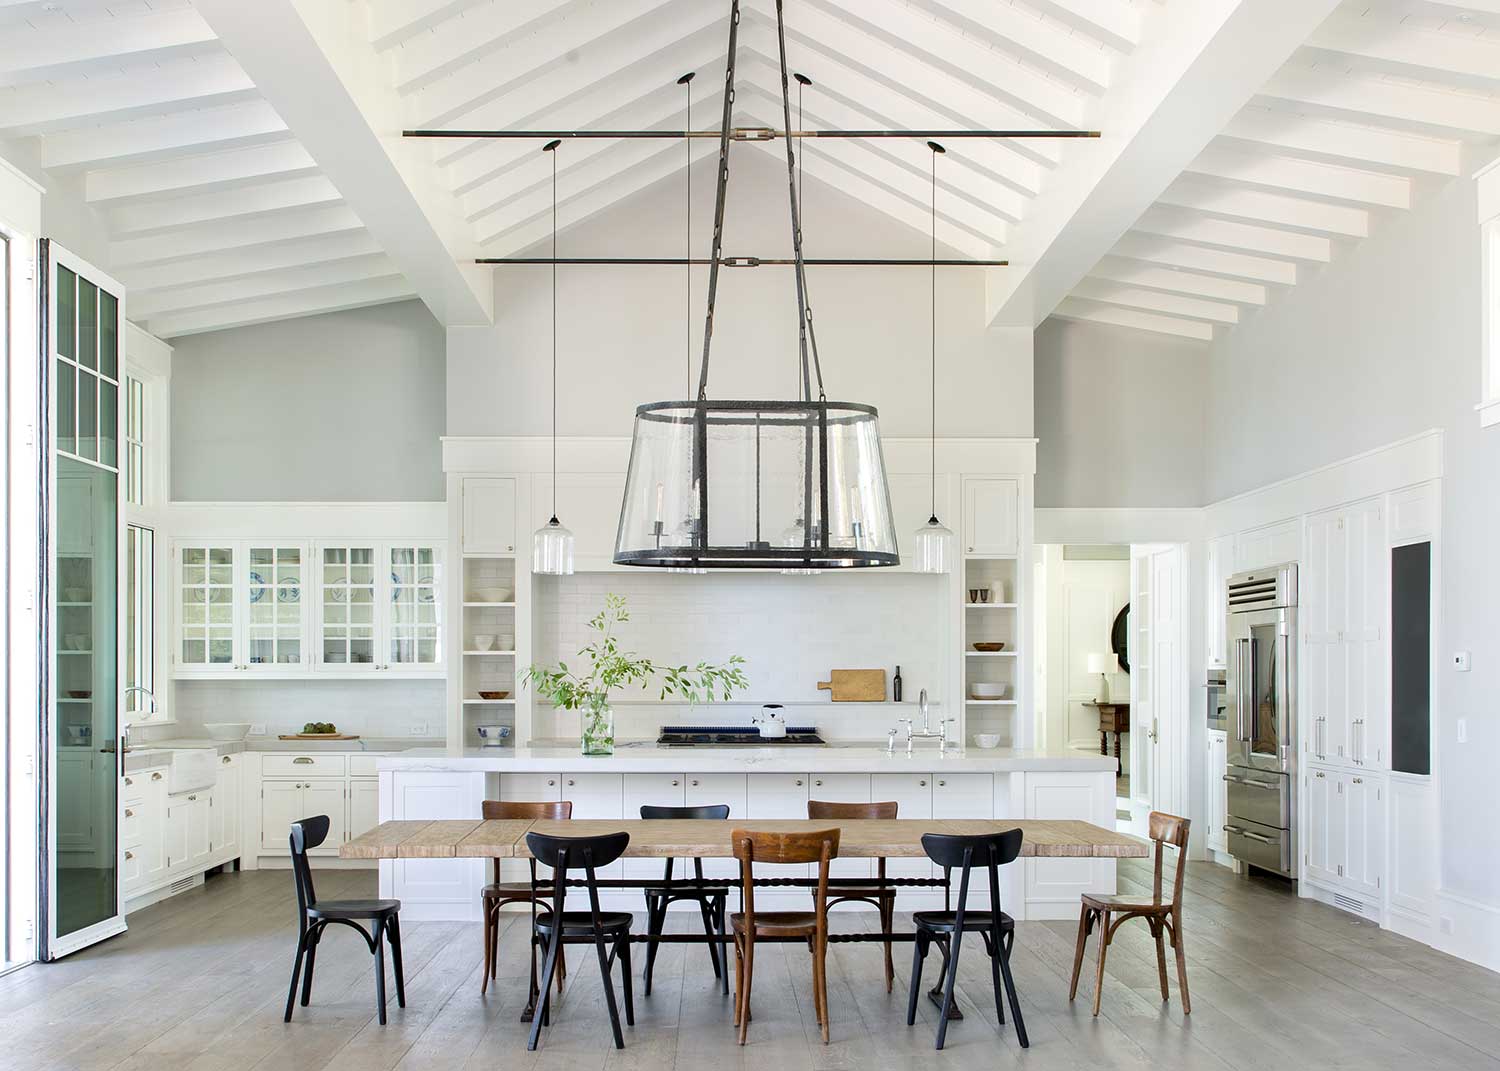 white kitchen with beams on tall ceiling, black iron lighting pendants and long wood dining table and chairs